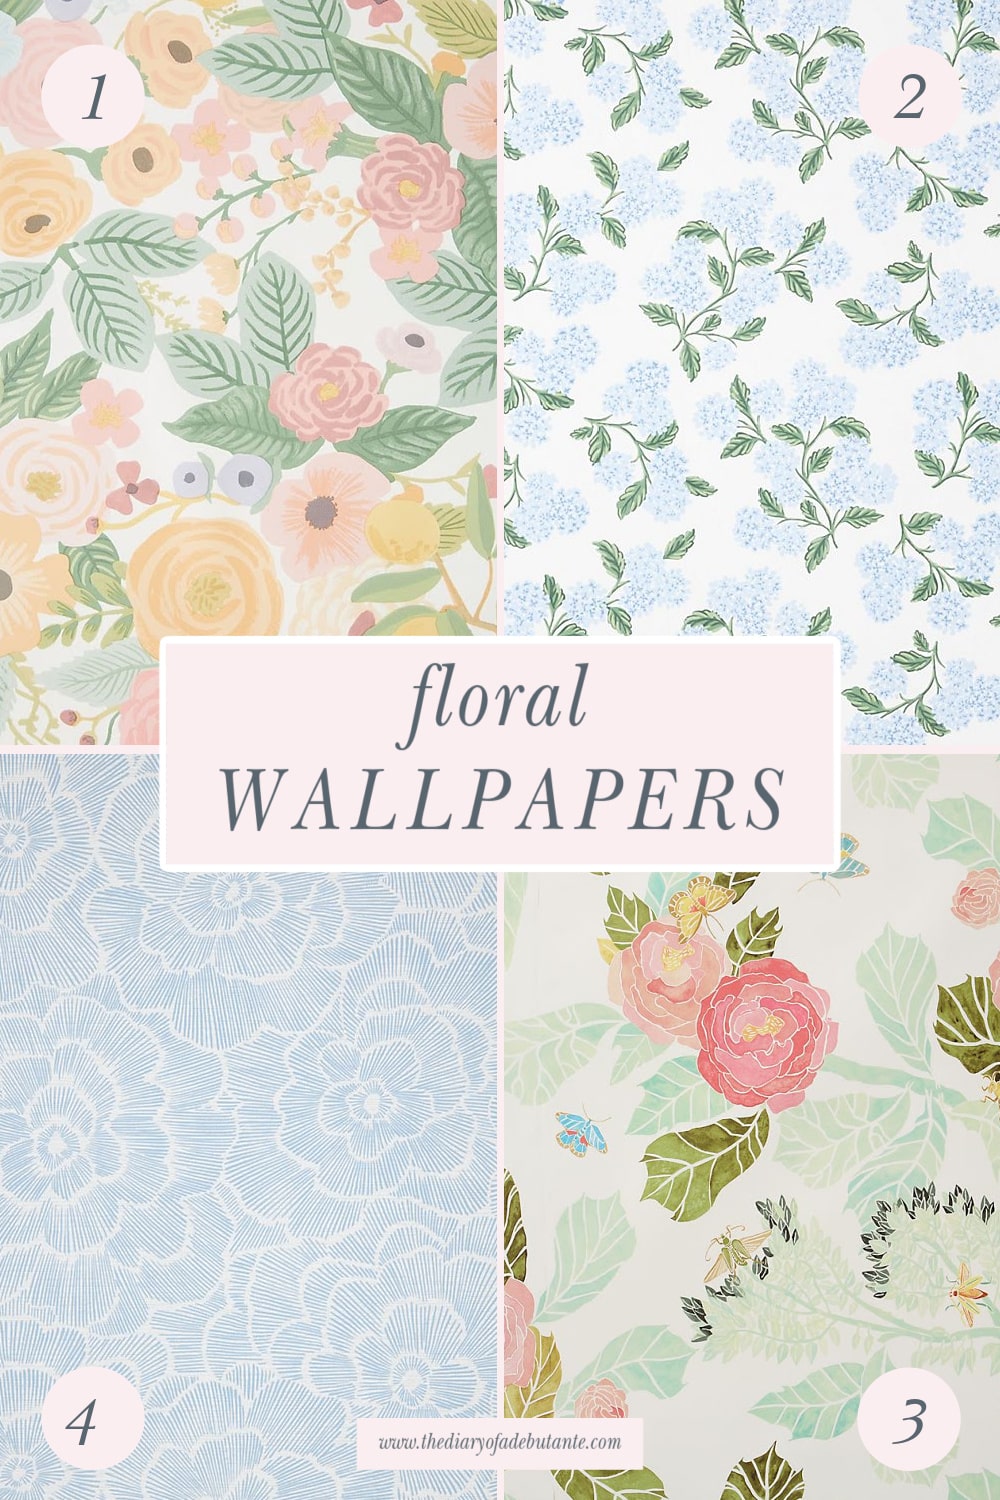 Floral wallpaper ideas for living rooms from blogger Stephanie Ziajka on Diary of a Debutante